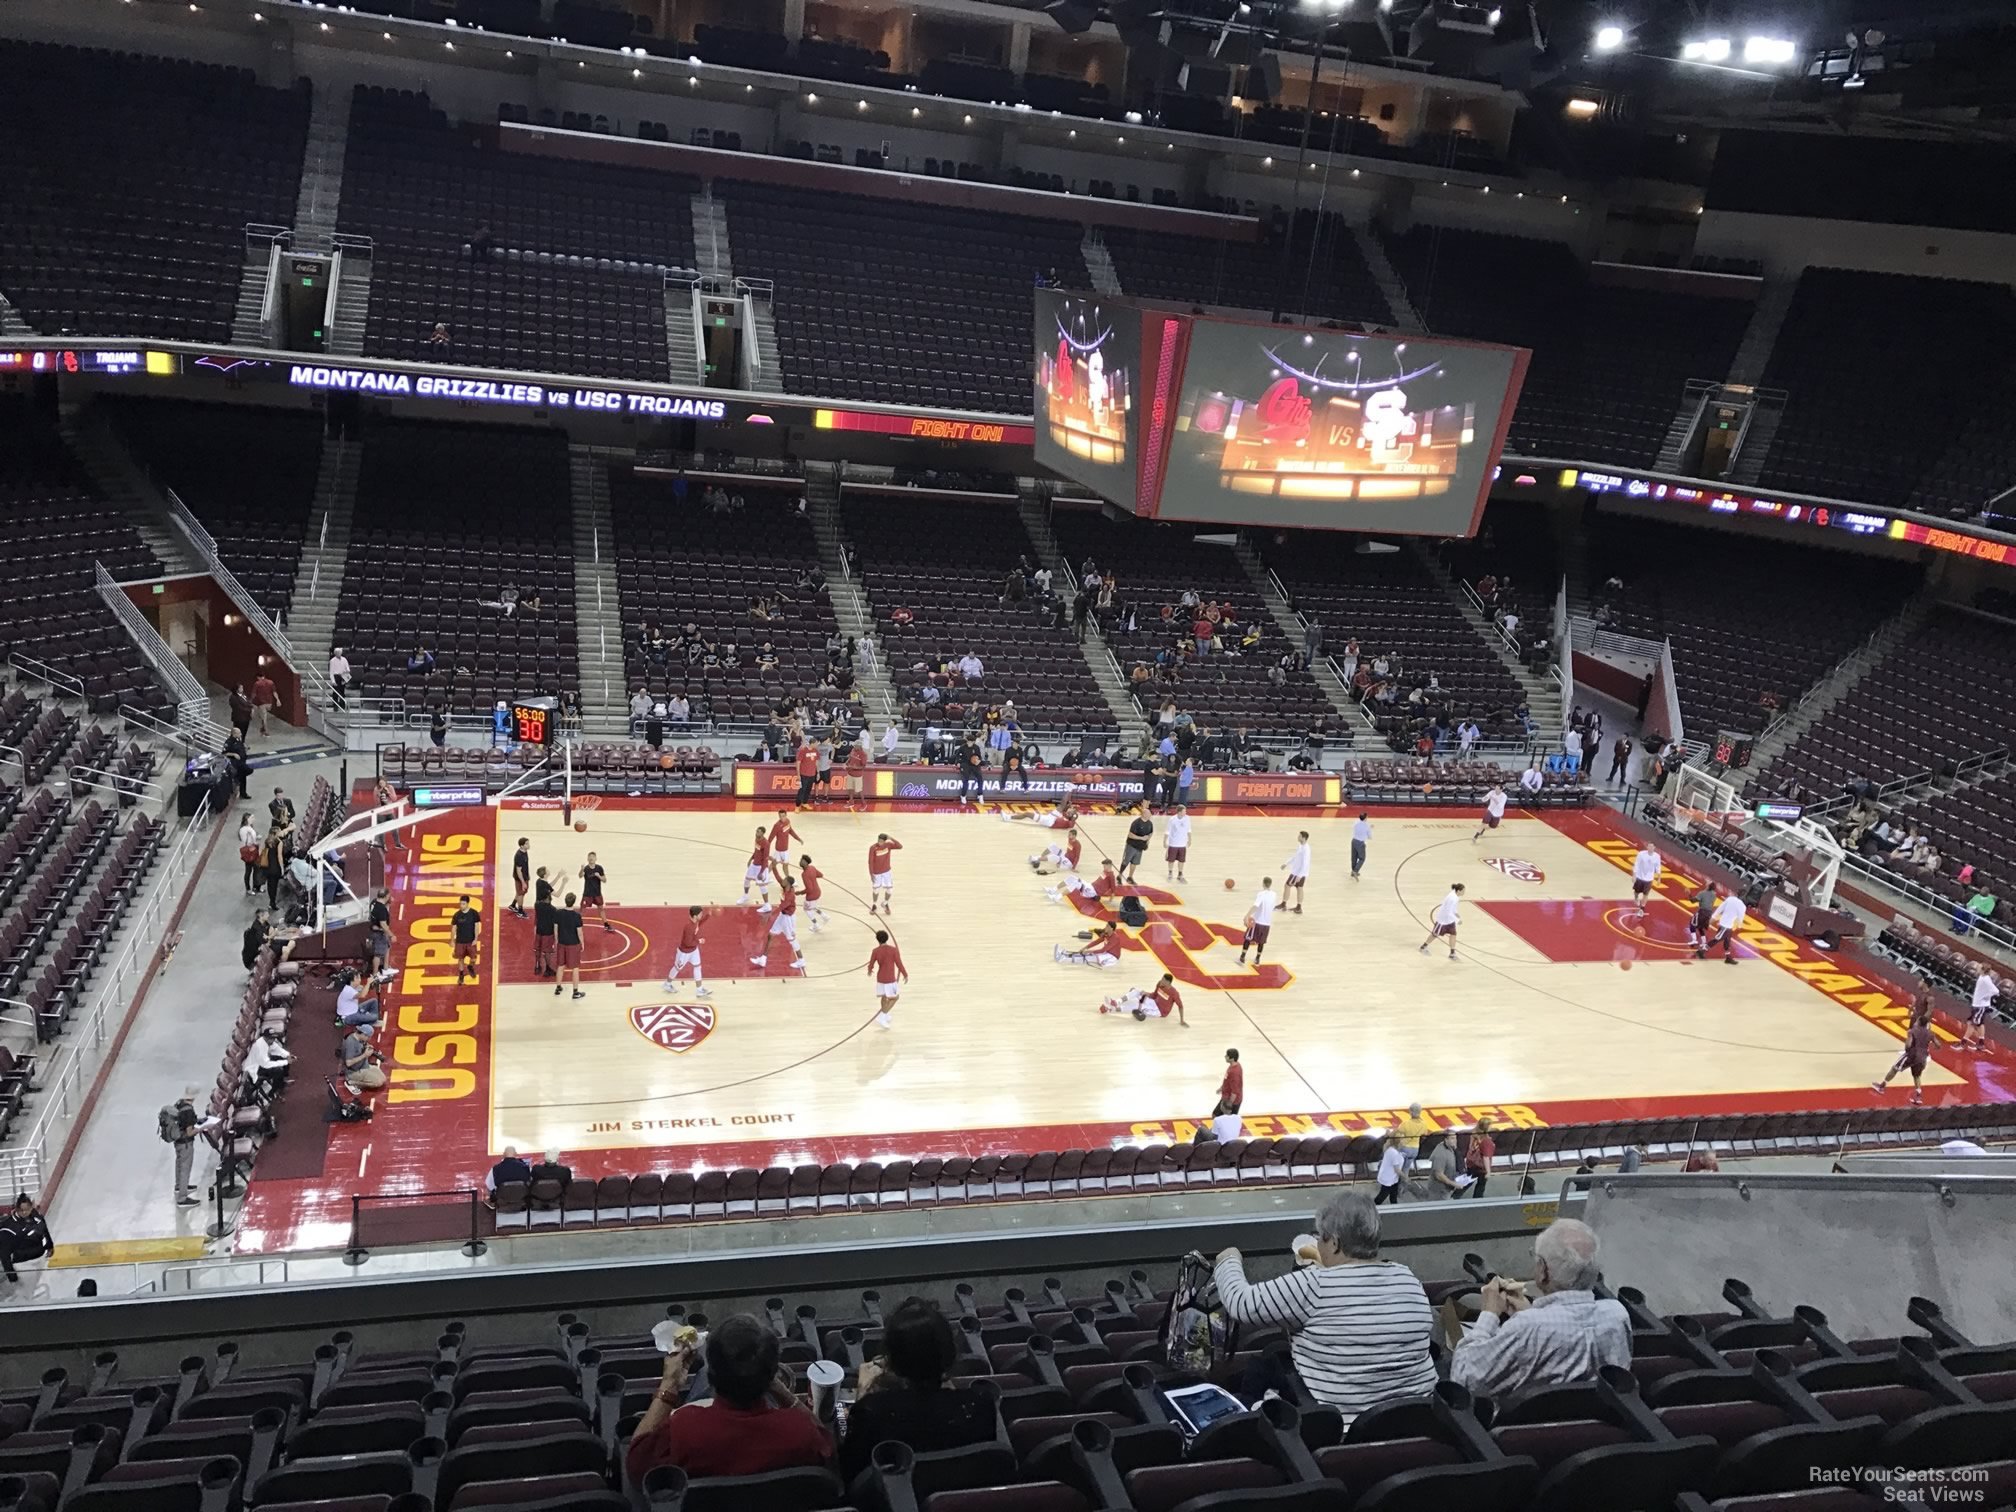 section 204, row 10 seat view  - galen center